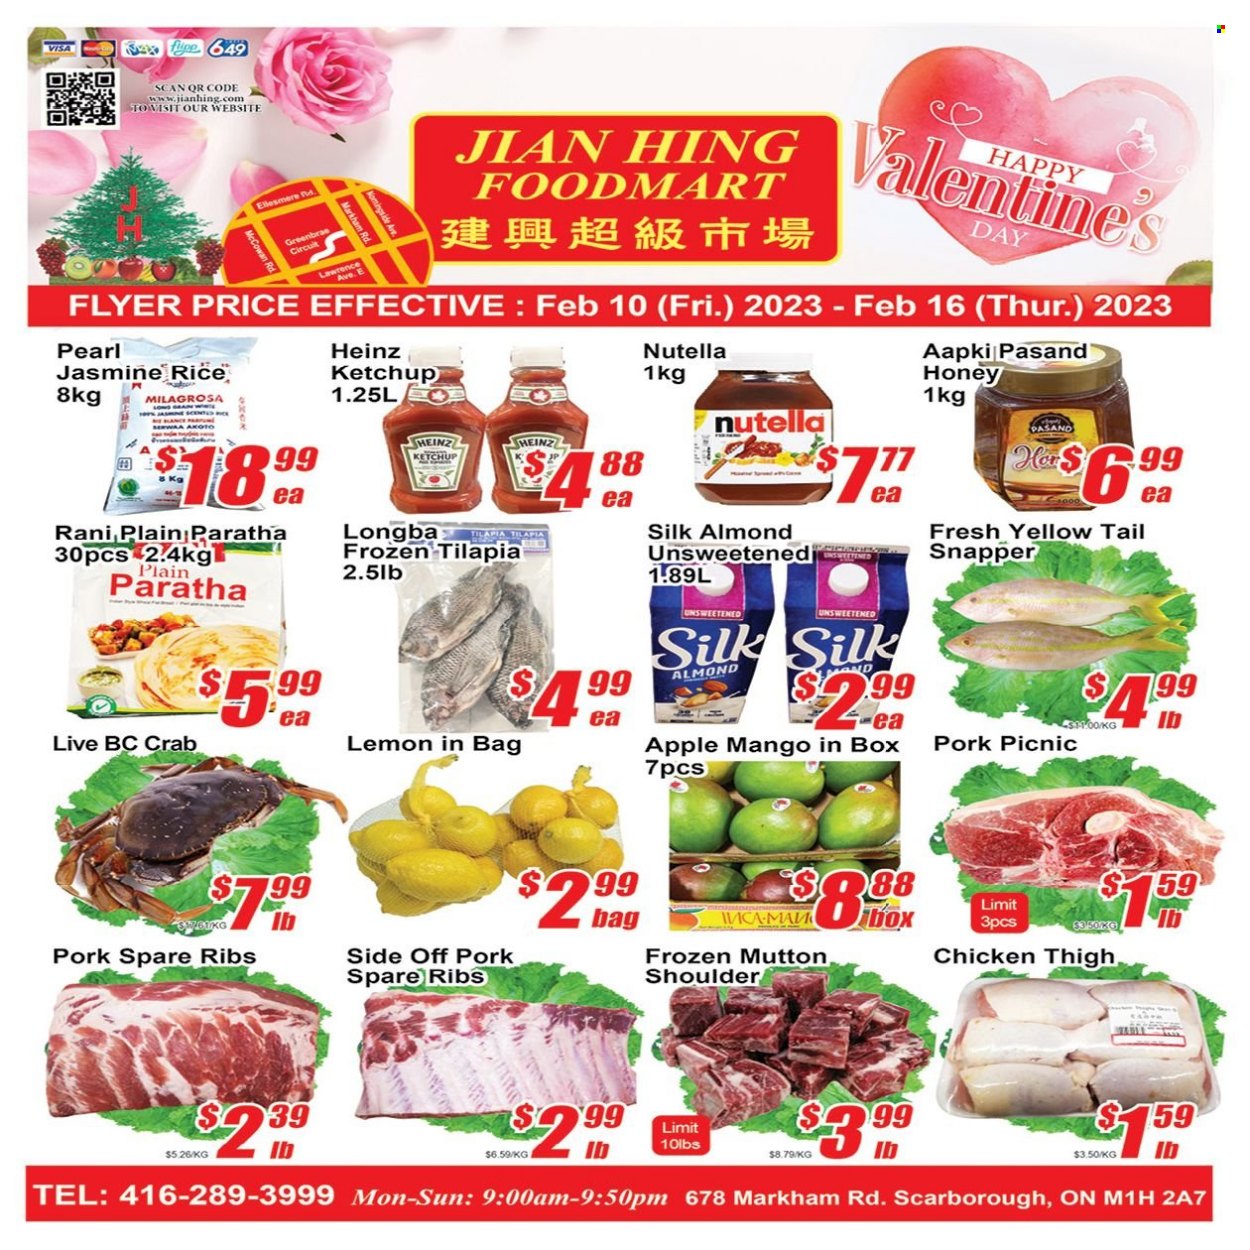 thumbnail - Jian Hing Supermarket Flyer - February 10, 2023 - February 16, 2023 - Sales products - mango, tilapia, crab, rice, jasmine rice, honey, ribs, pork meat, pork ribs, pork spare ribs, mutton meat, Heinz, ketchup, Nutella. Page 1.